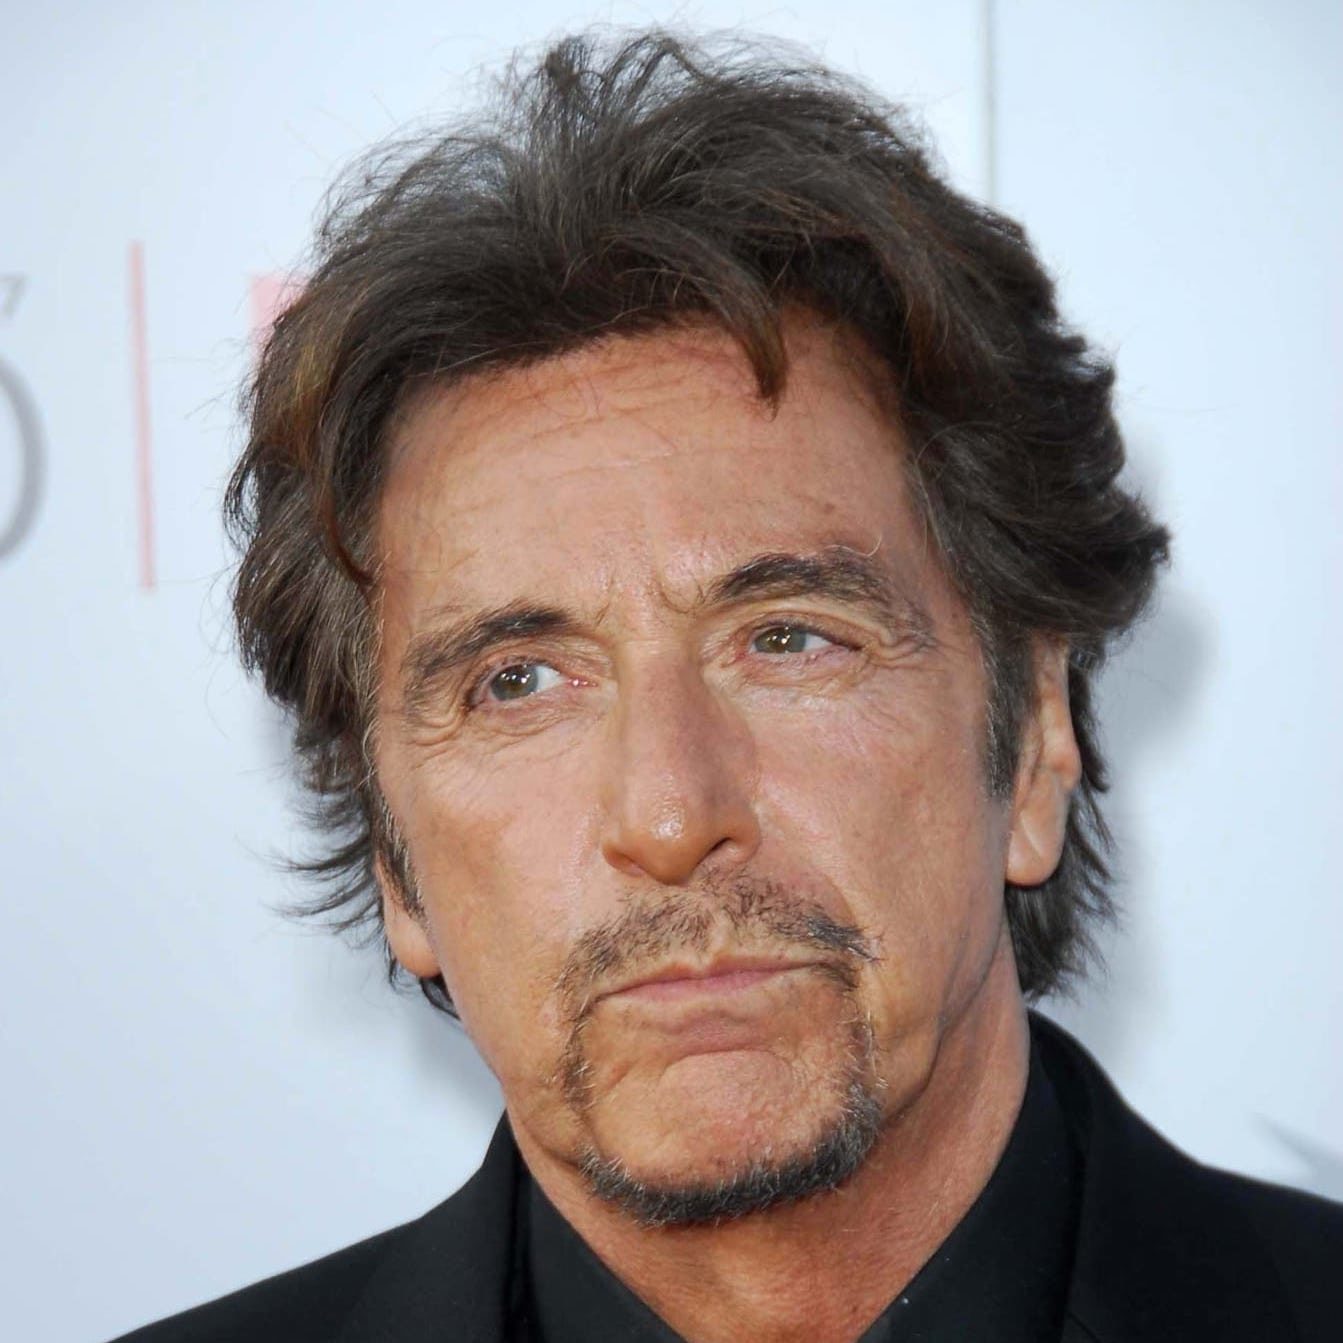 Al Pacino Net Worth, Age, Height, Parents, More